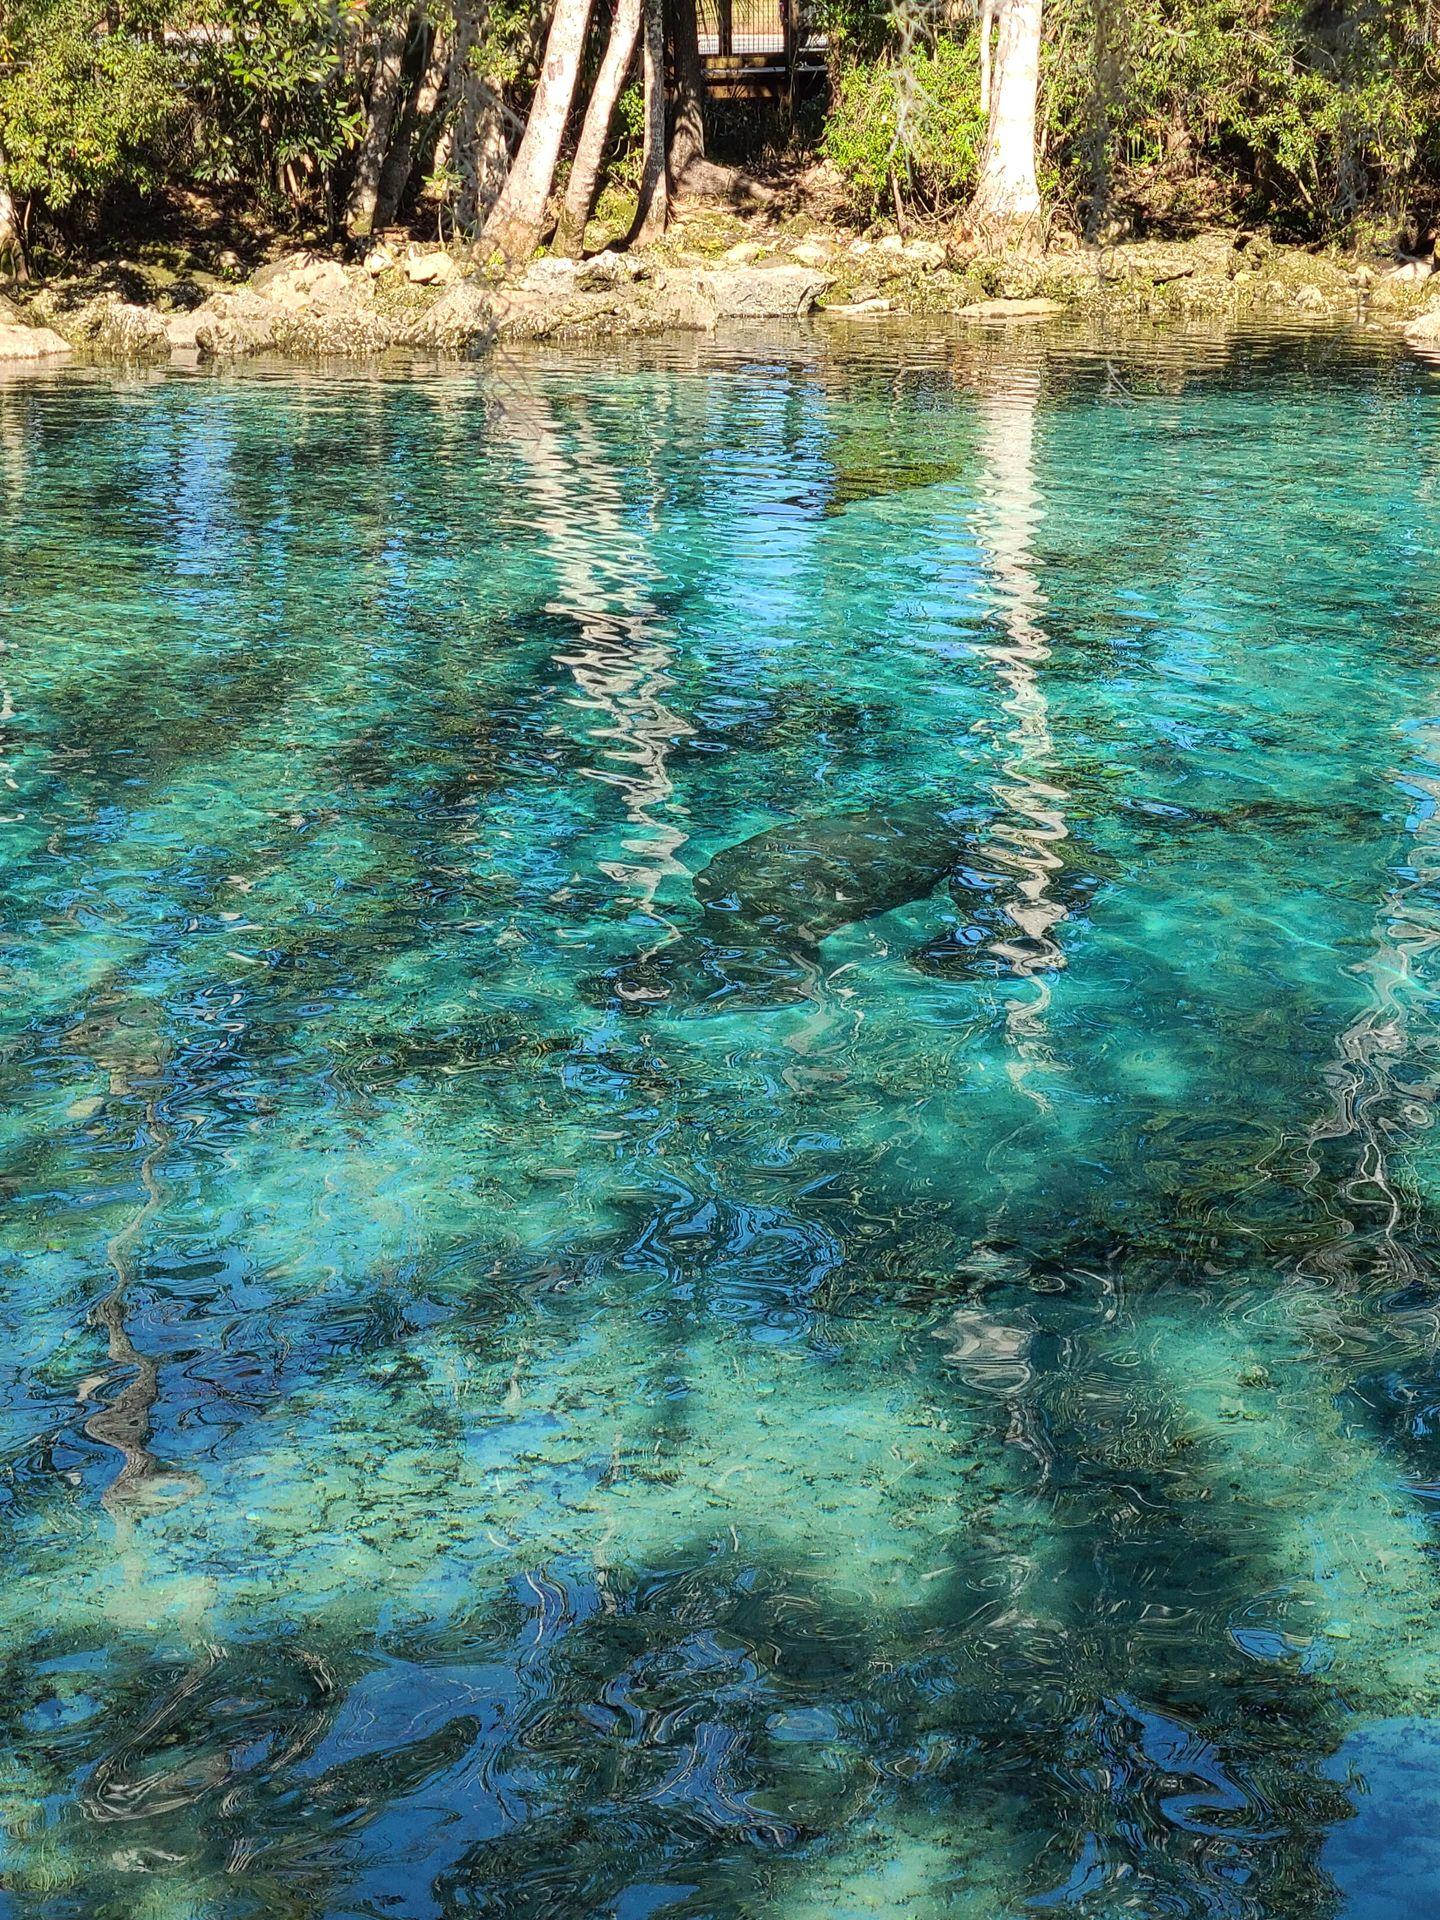 Looking at the clear, blue water at Three Sisters Spring.